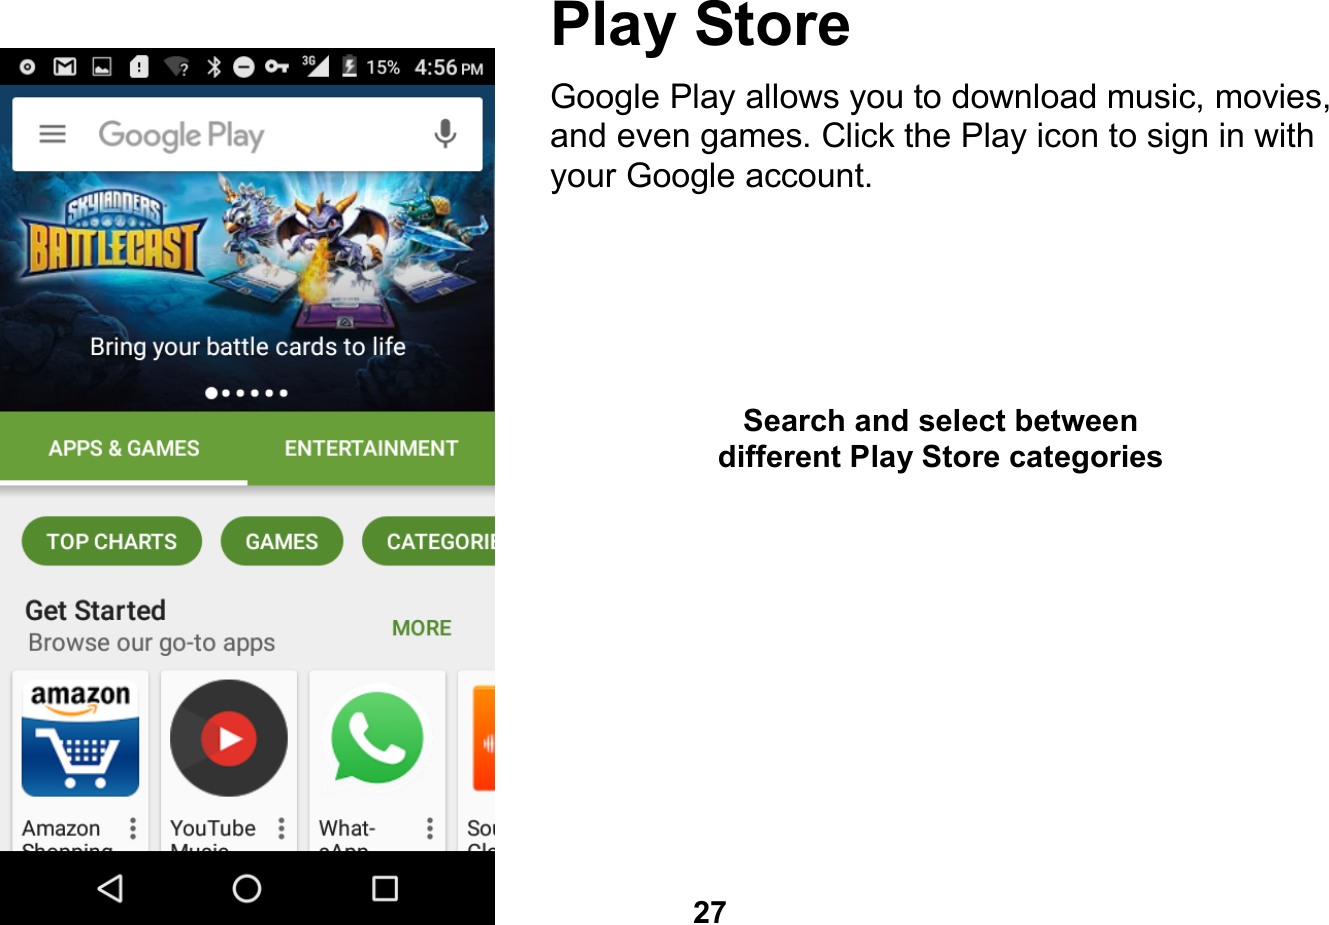   27  Play Store Google Play allows you to download music, movies, and even games. Click the Play icon to sign in with your Google account.          Search and select between different Play Store categories 